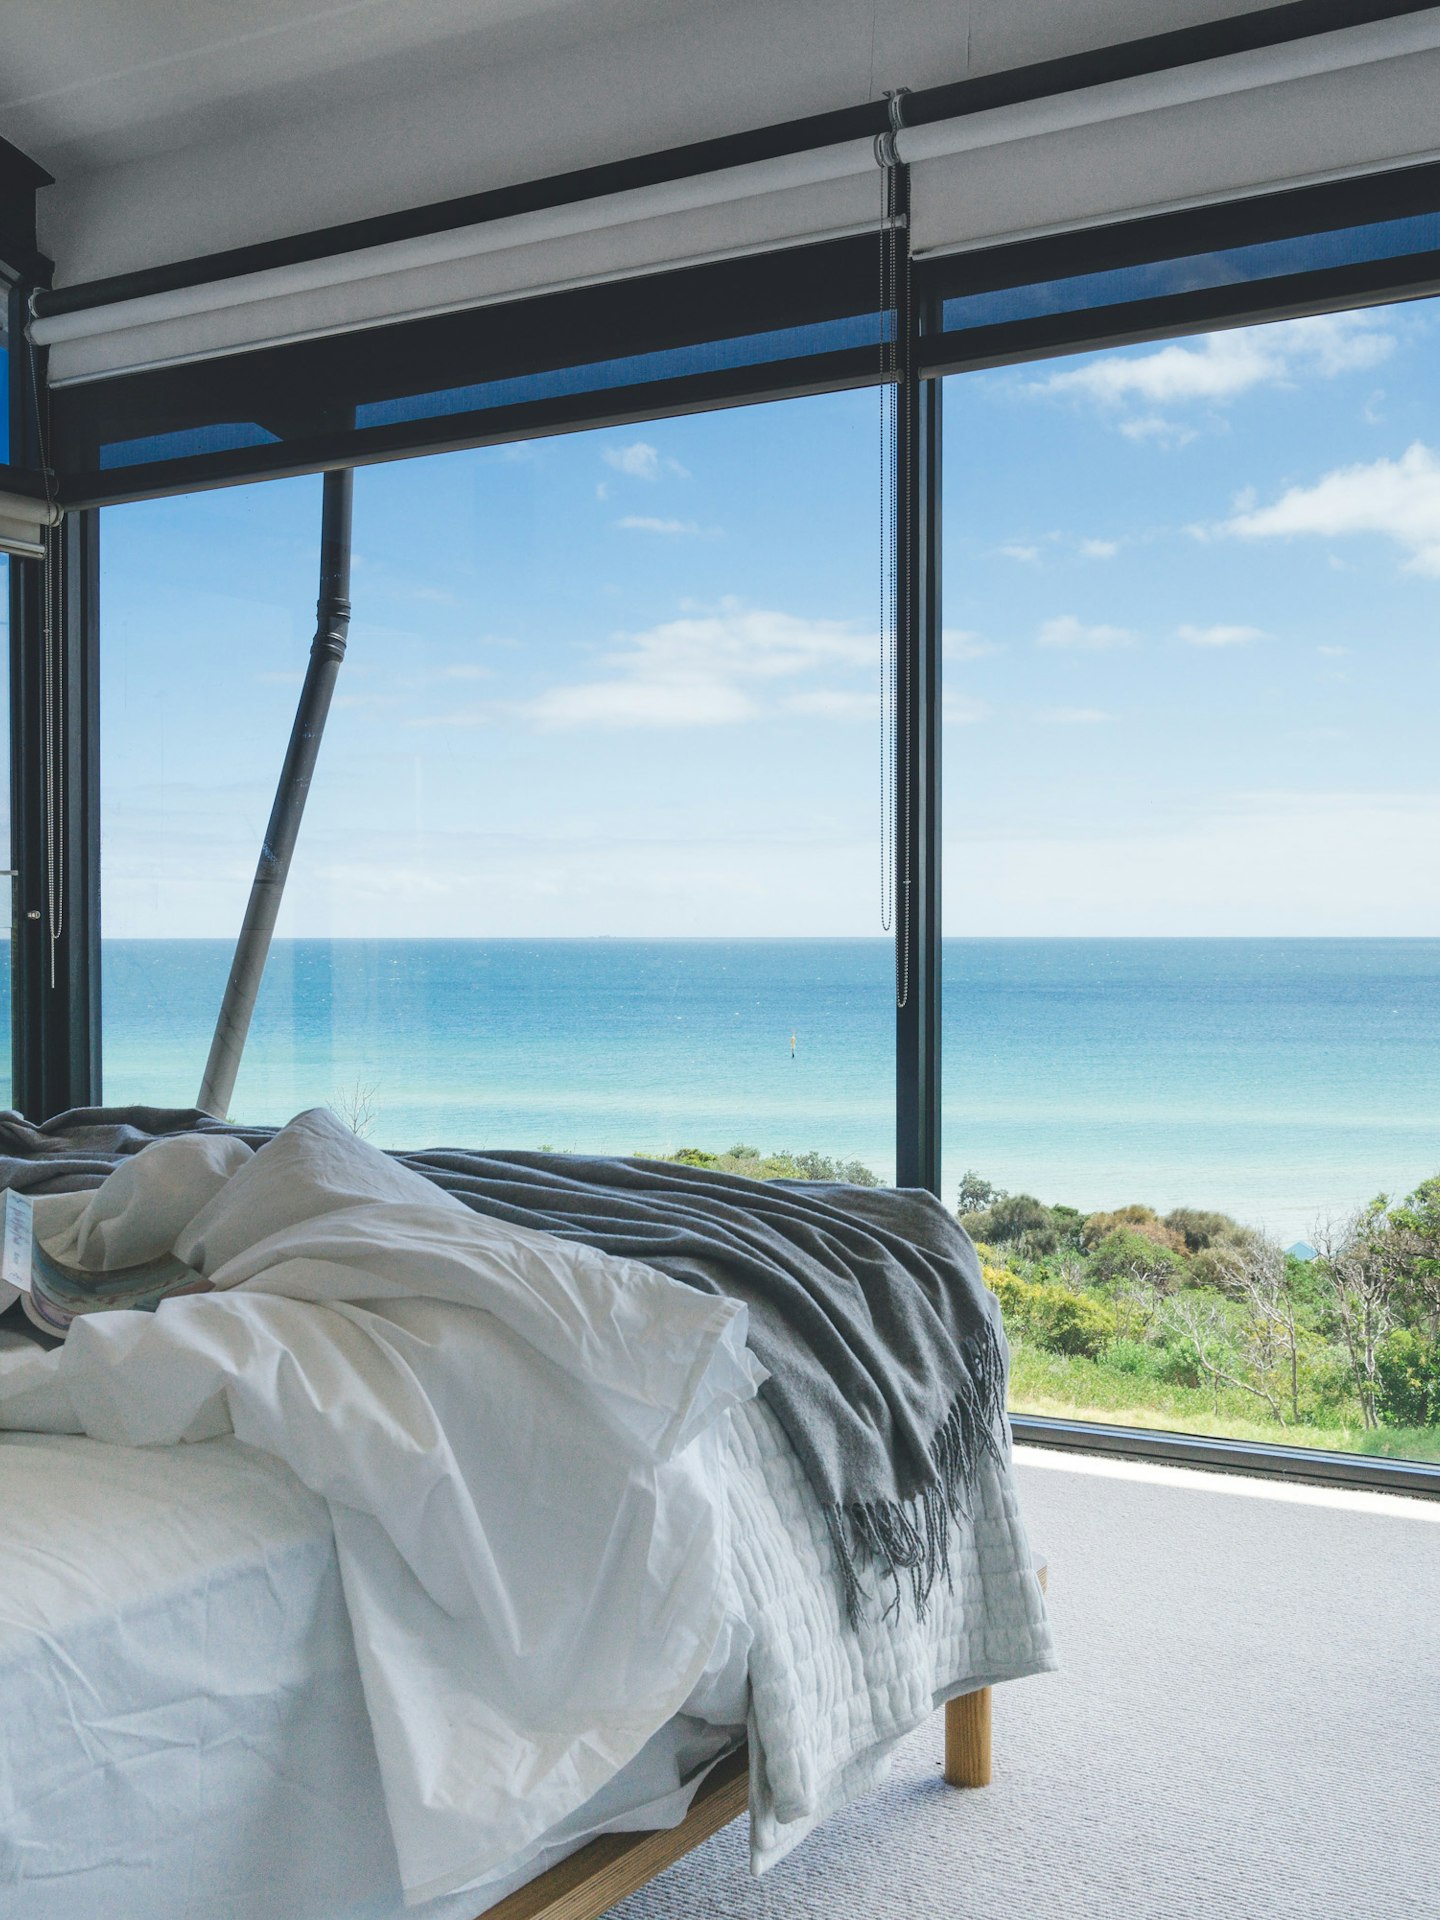 a bed looking out to the ocean